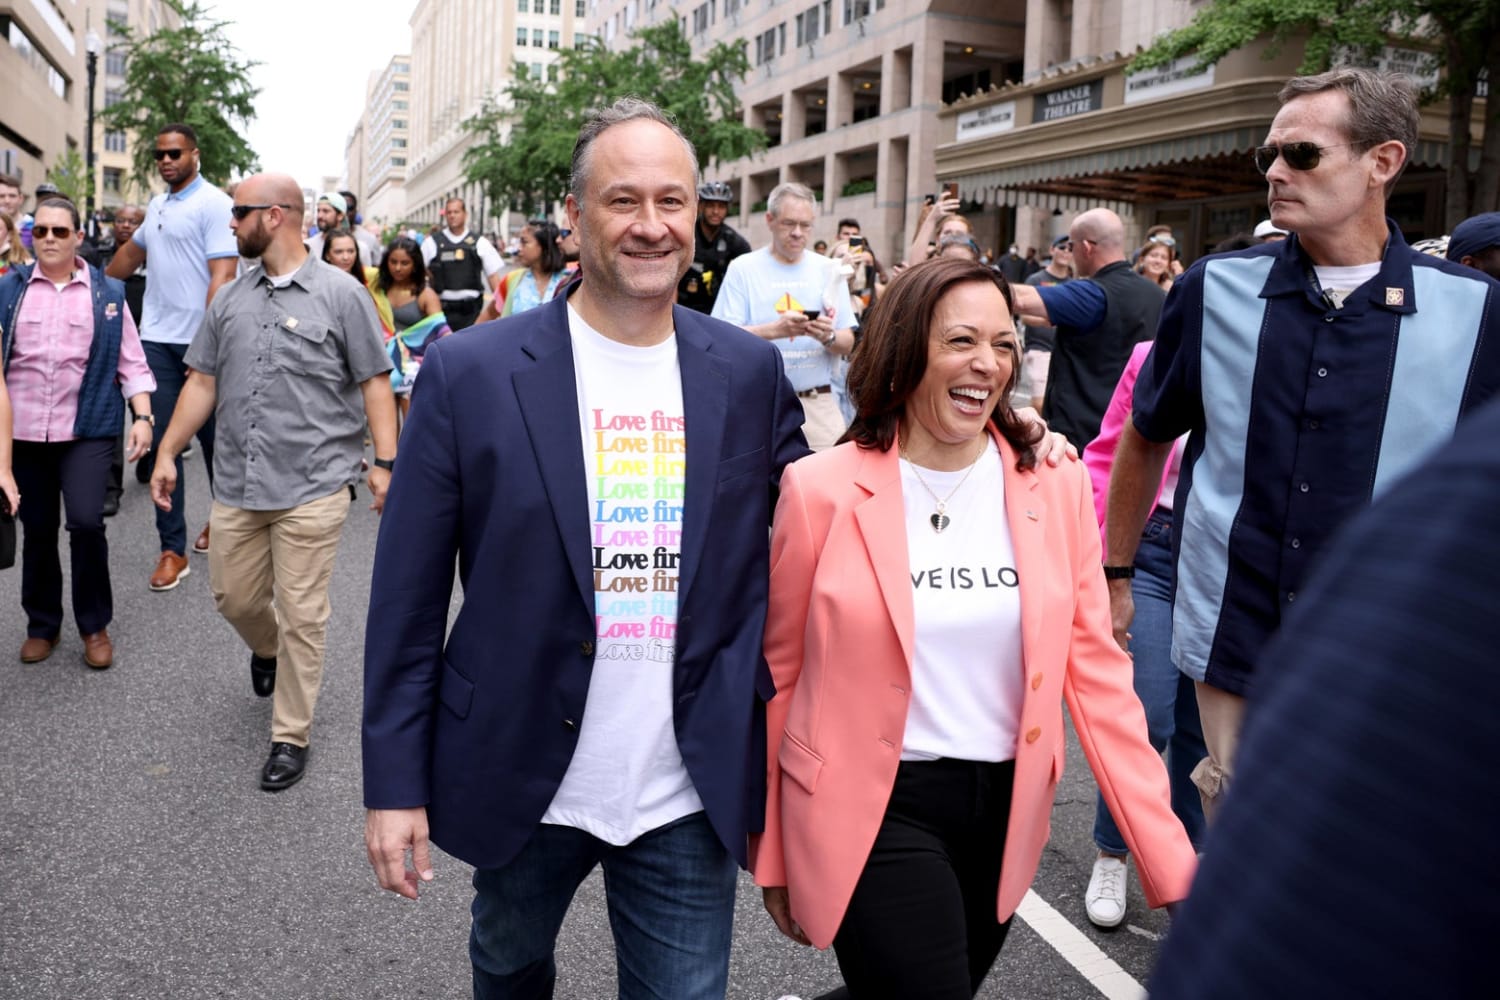 Kamala Harris Is First Sitting Vice President to March in Pride Event